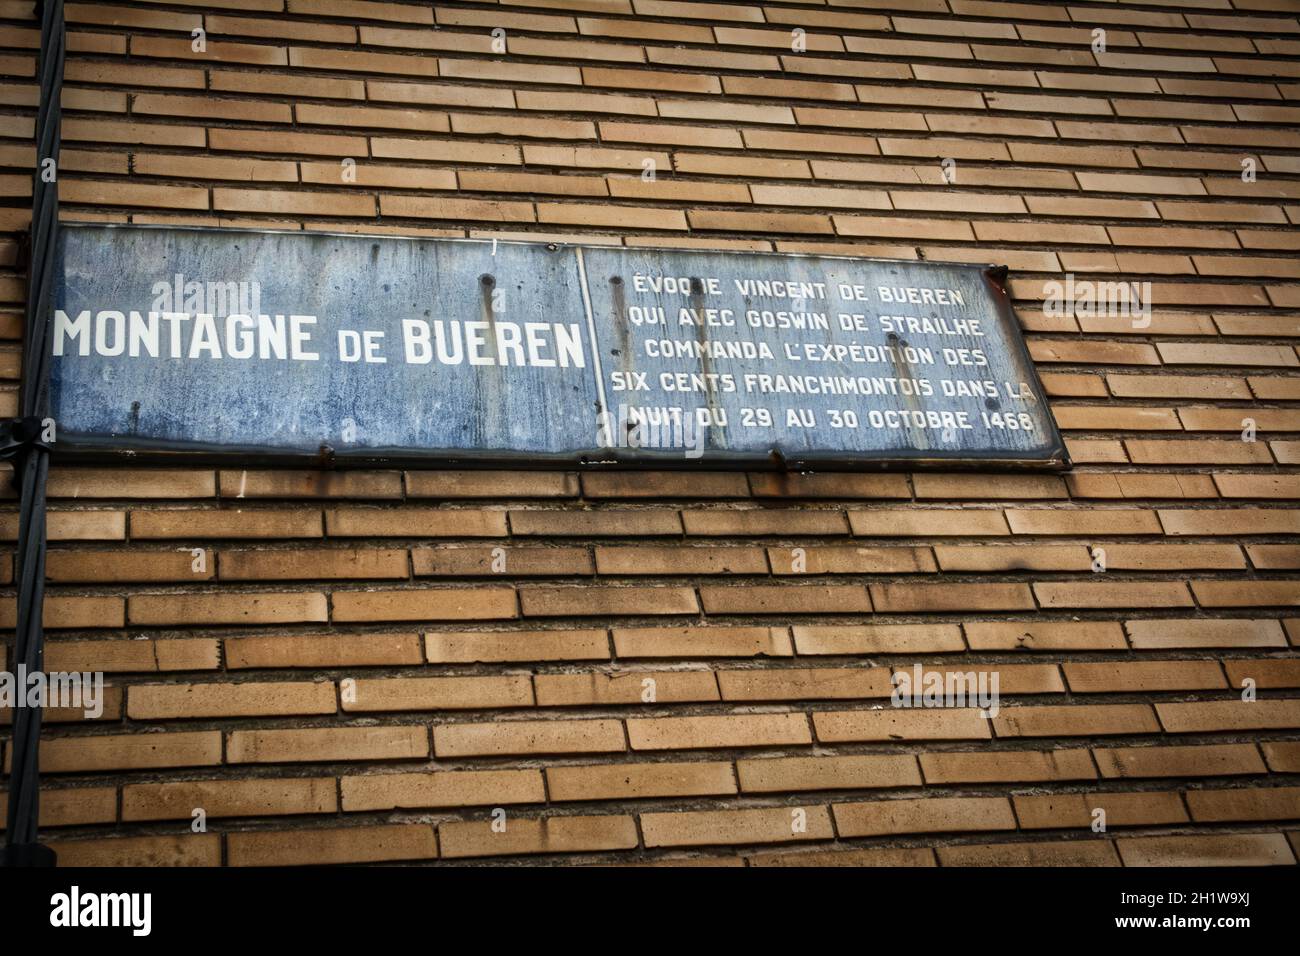 Liege, Belgium, June 2021: Street sign of Montagne de Bueren in Liege on a brick wall. Close-up and detail. Stock Photo